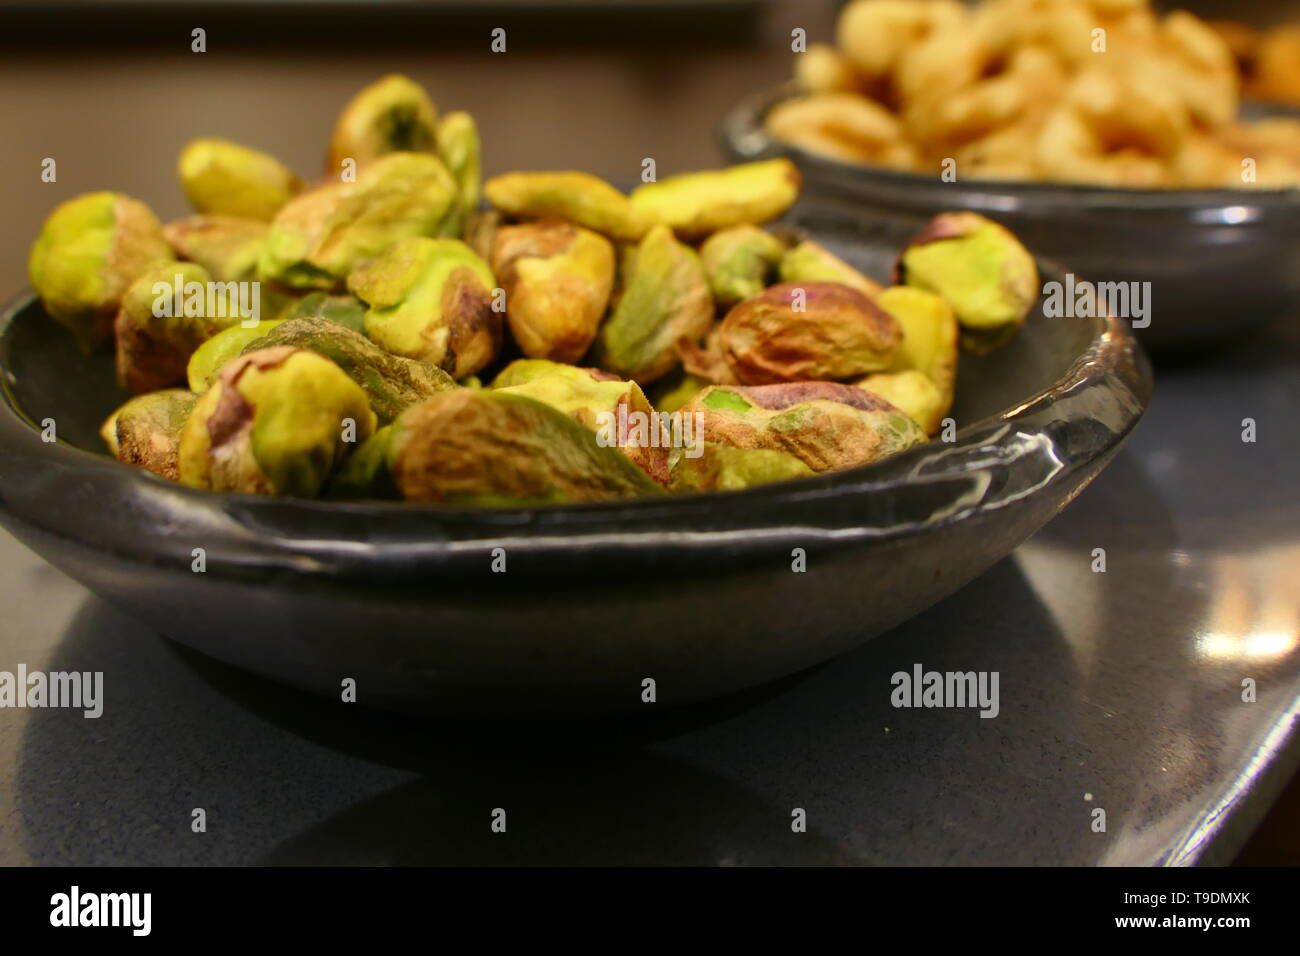 A Bowl with pistachios Stock Photo